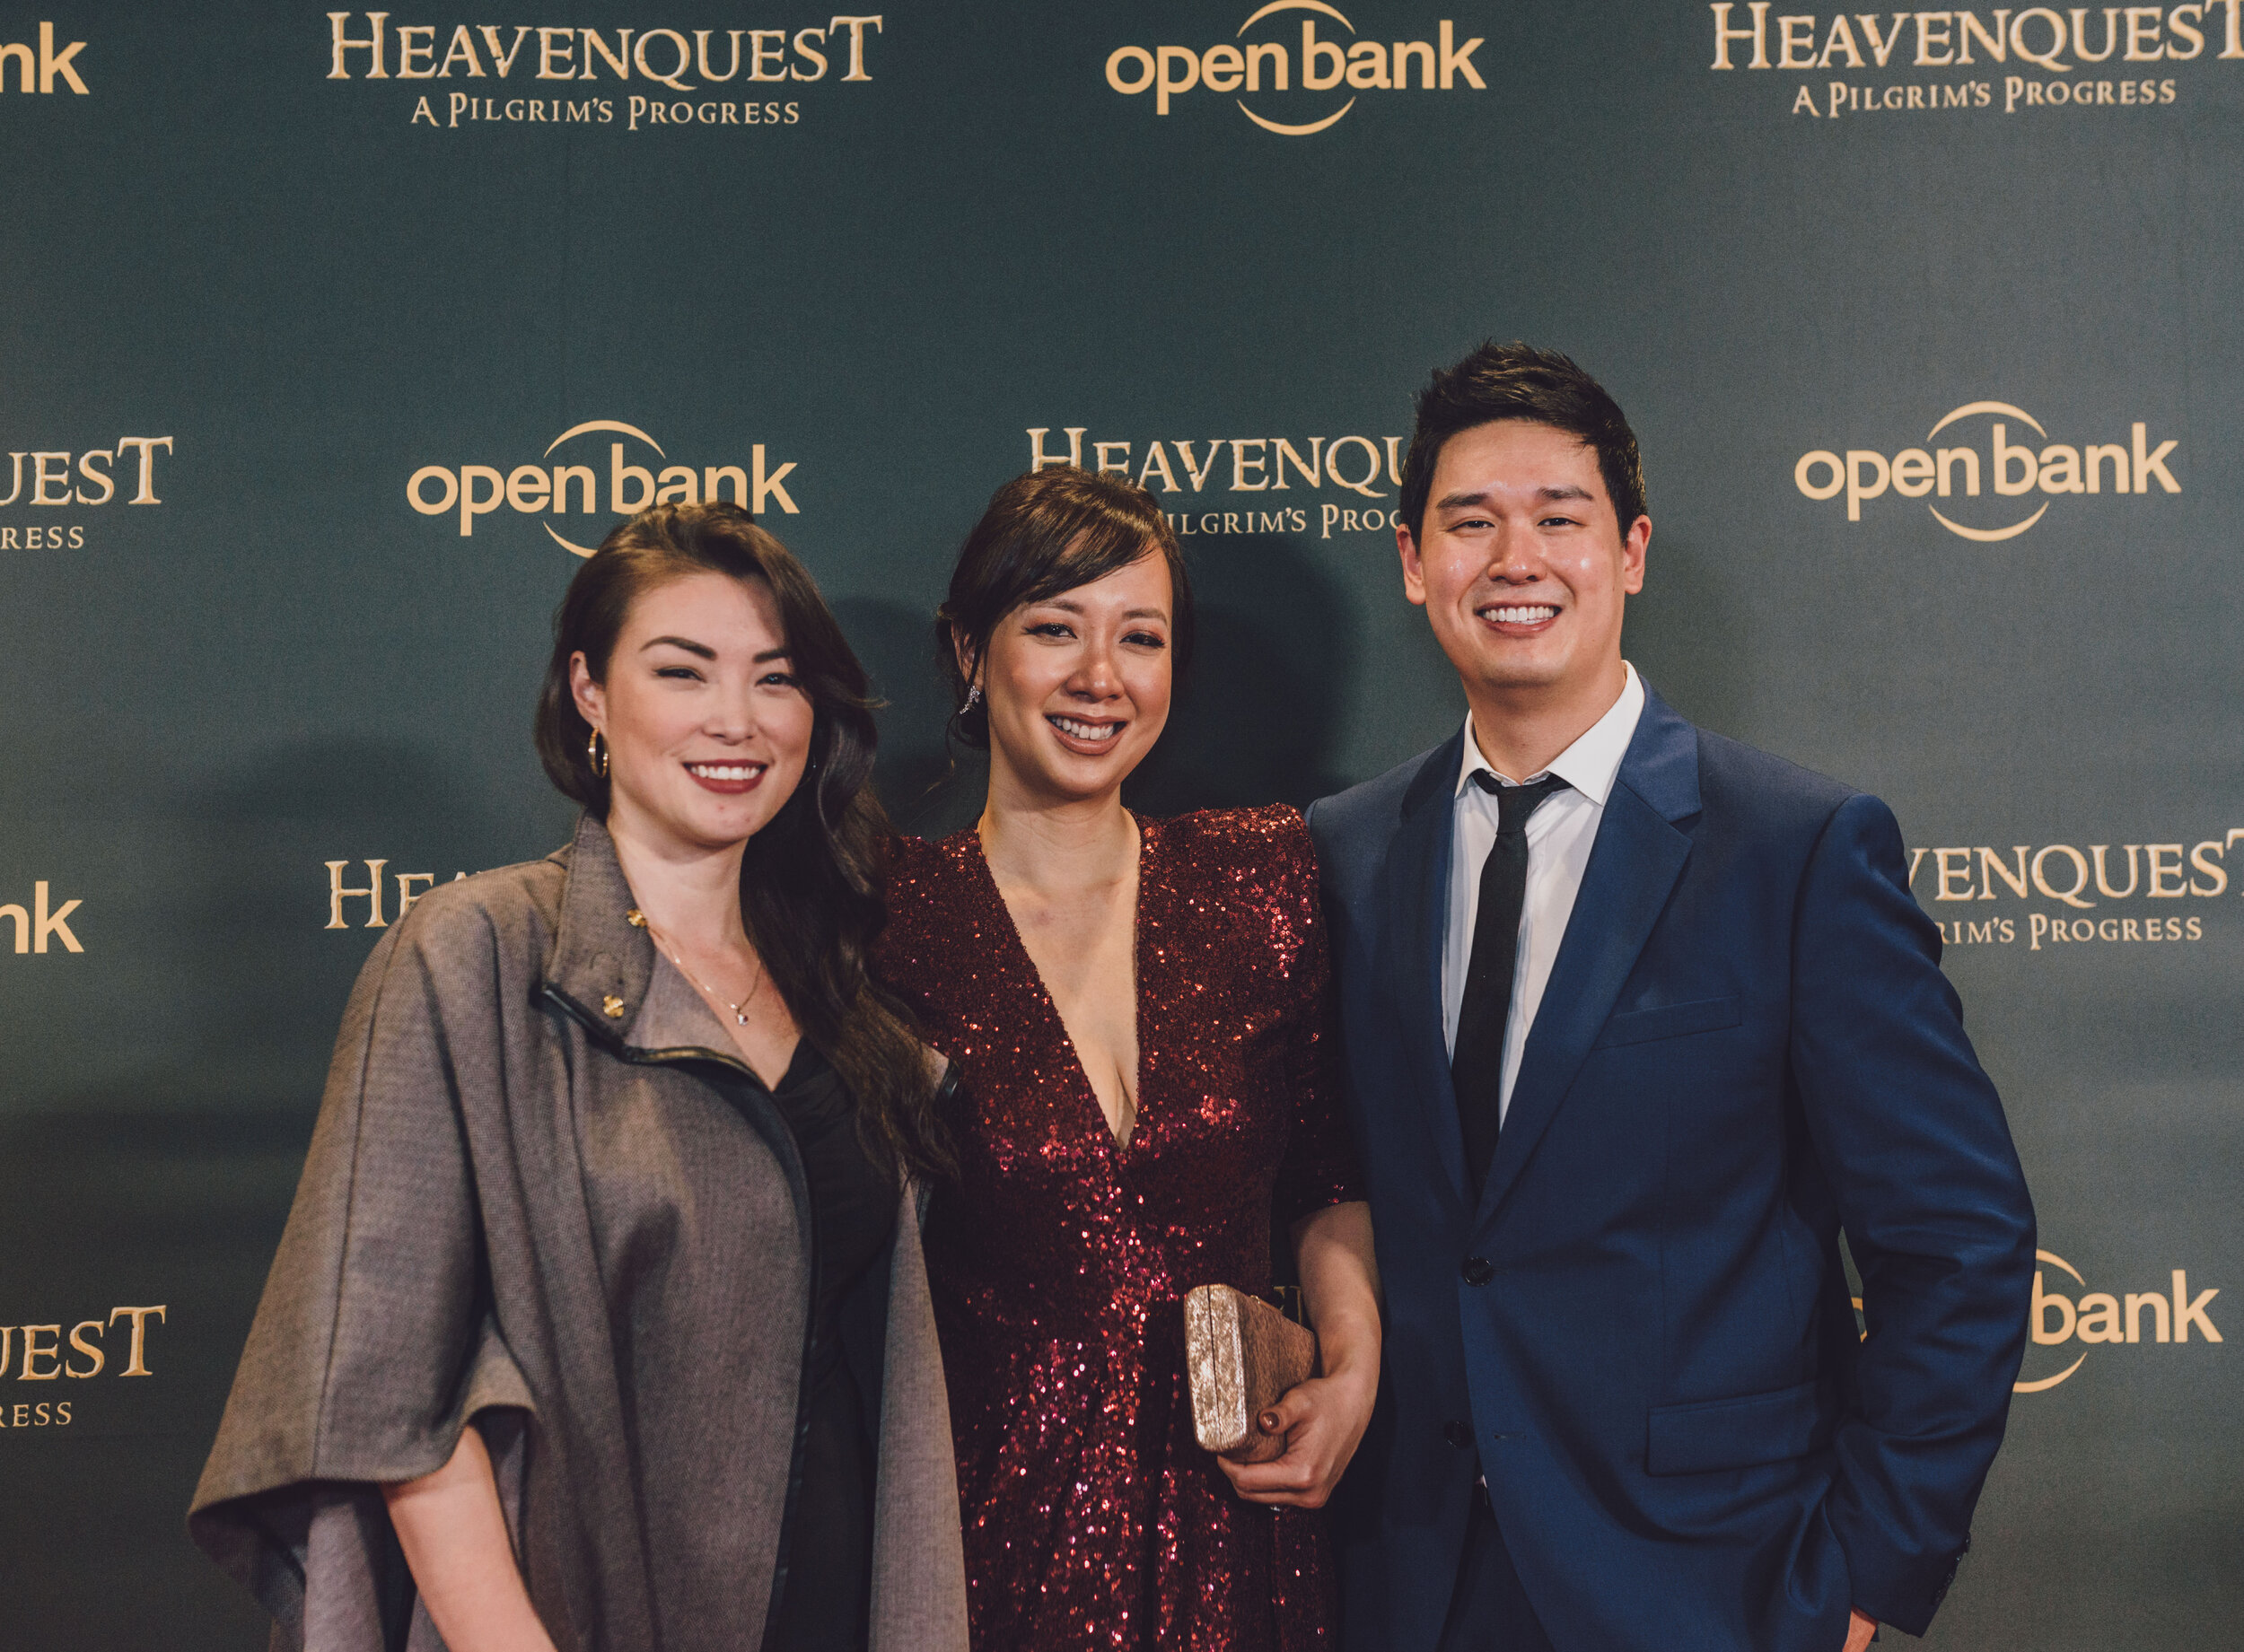   From left to right: Jessica (Event Coordinator), Rachel Tan, and Dan Mark of King Street Pictures  